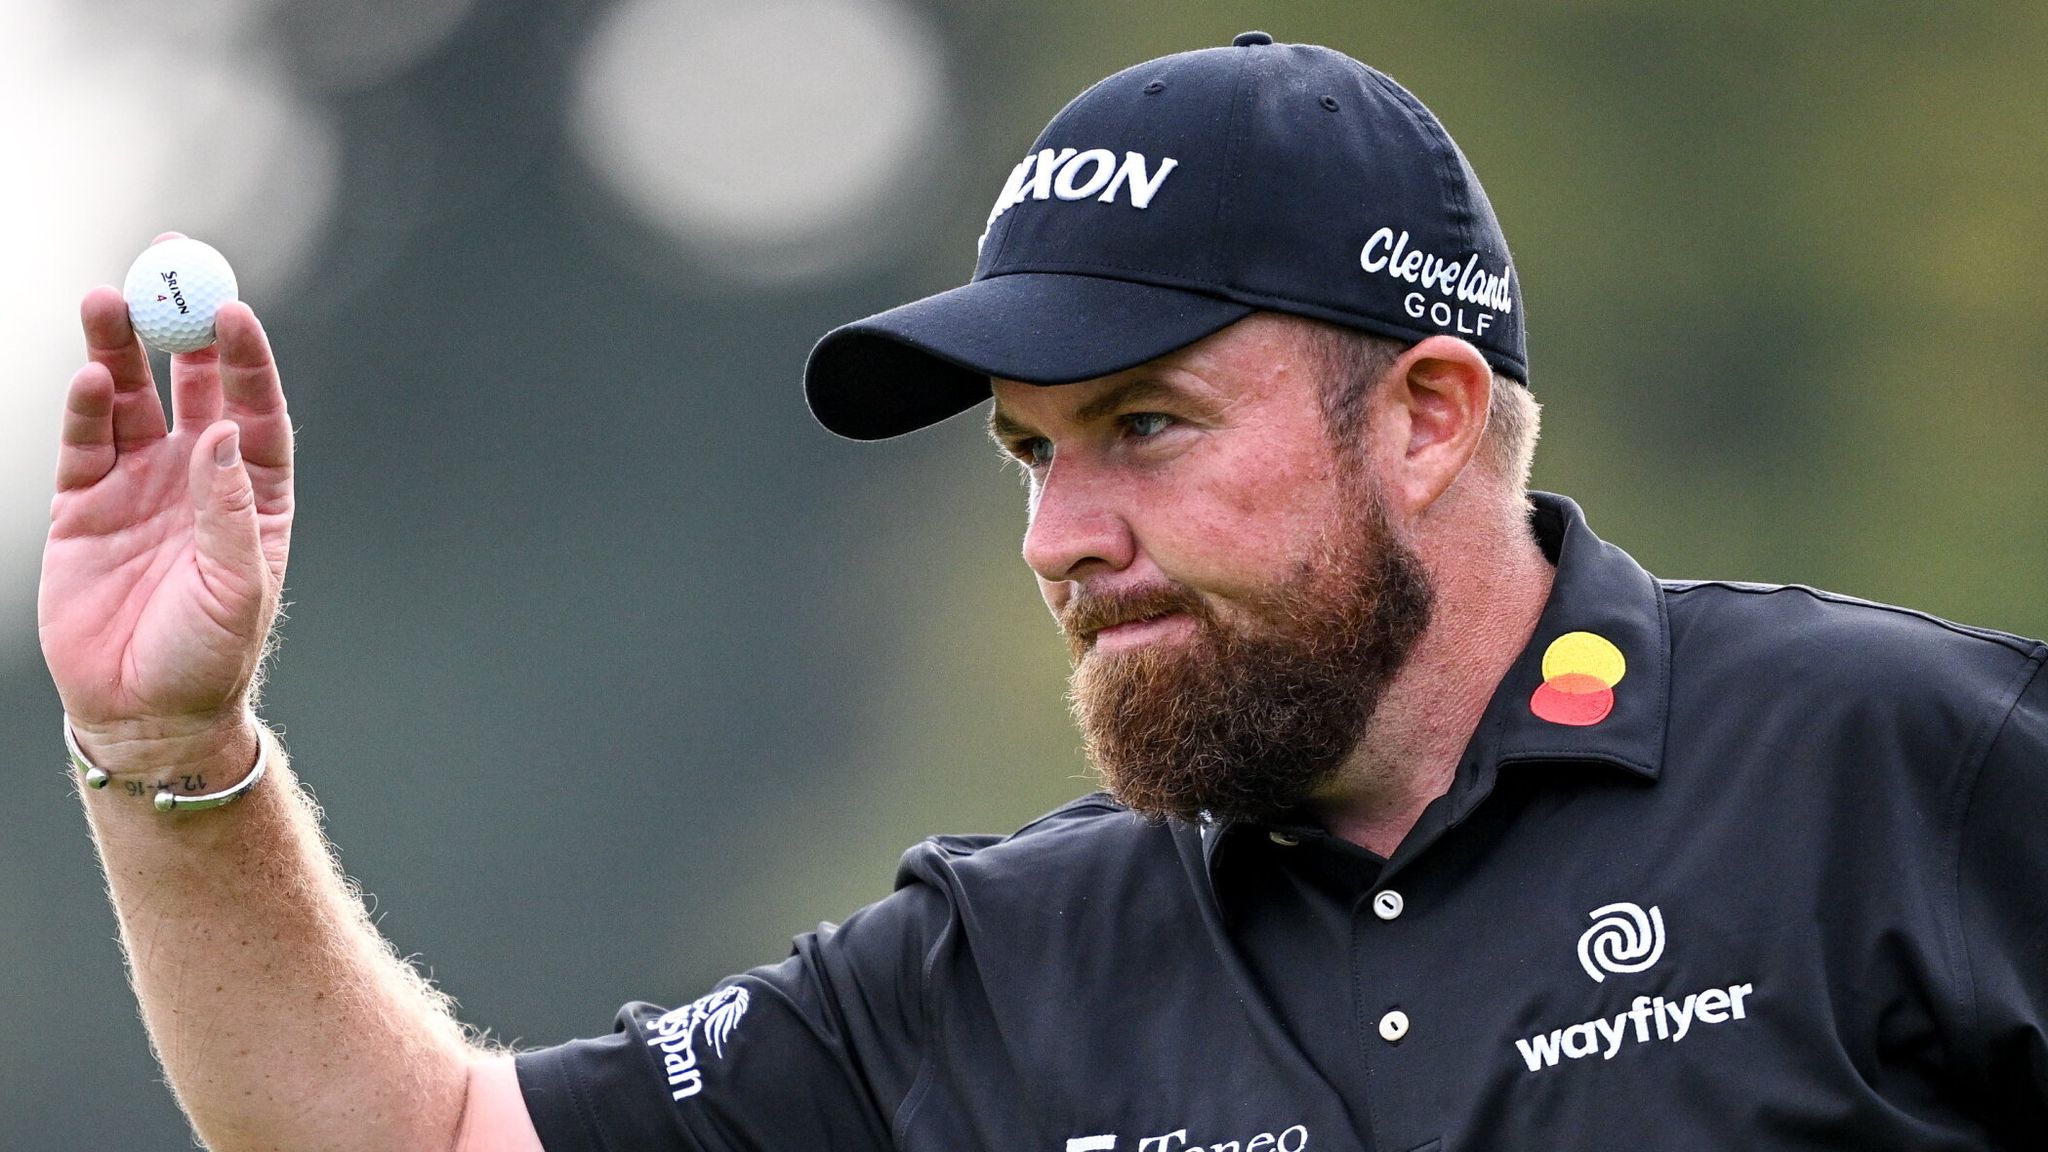 Shane Lowry shows pre-Ryder Cup form at Irish Open after needing Team Europe captains pick Golf News Sky Sports